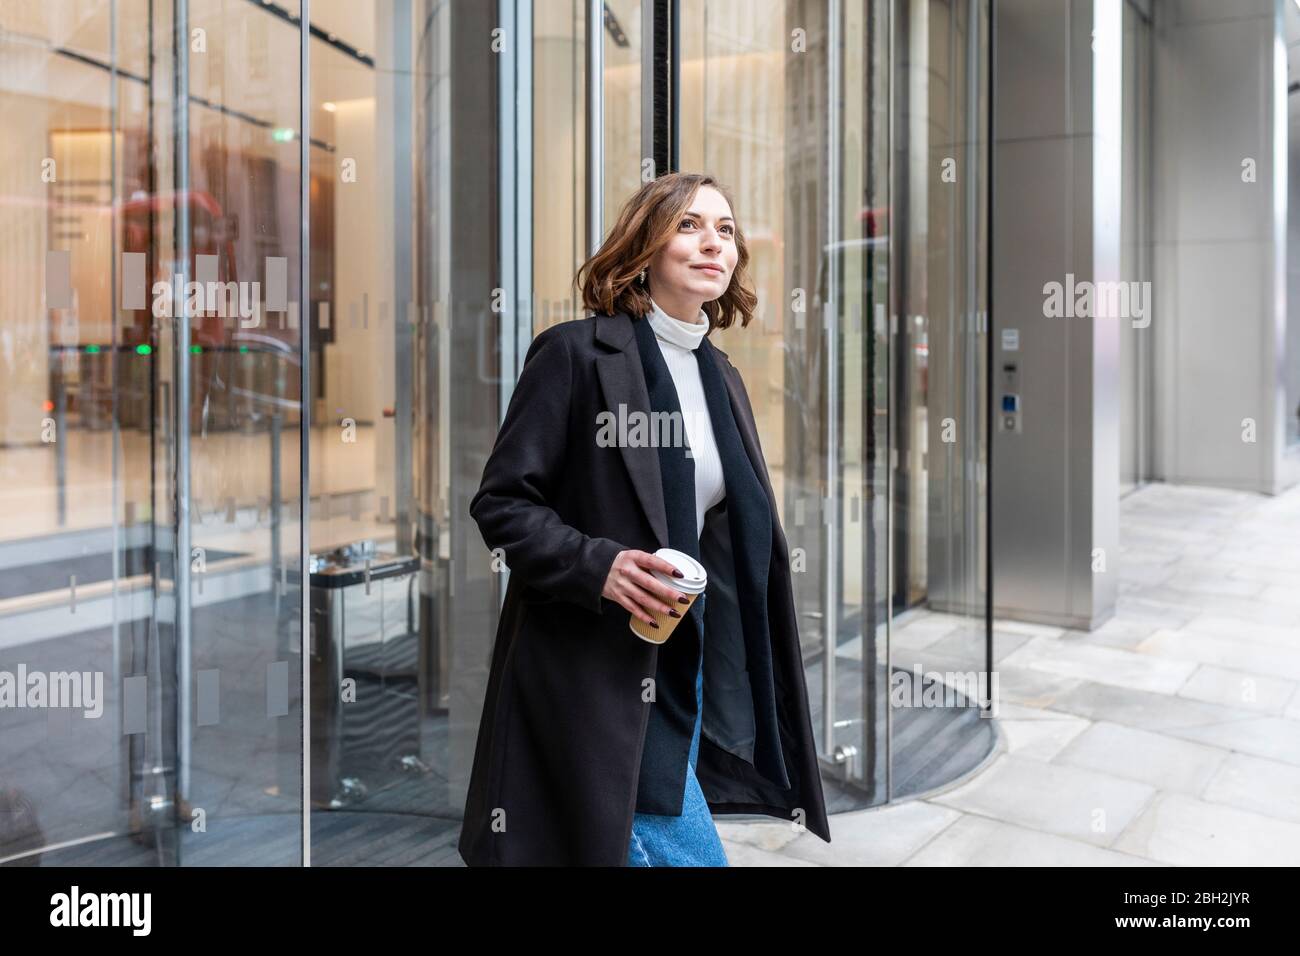 Woman in the city coming out from revolving door, London, UK Stock Photo